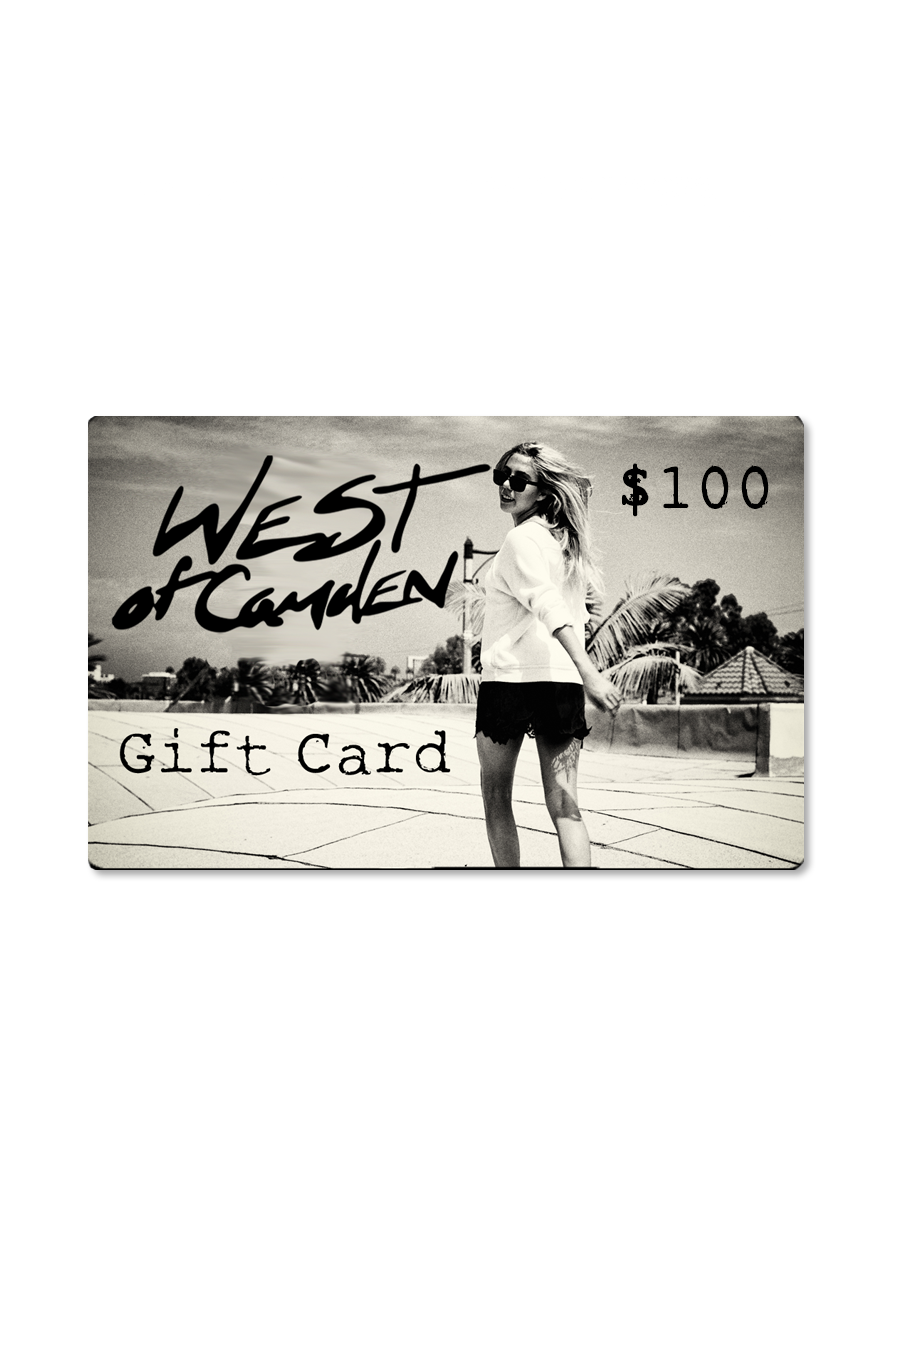 Gift Card - West of Camden - Main Image Number 5 of 5